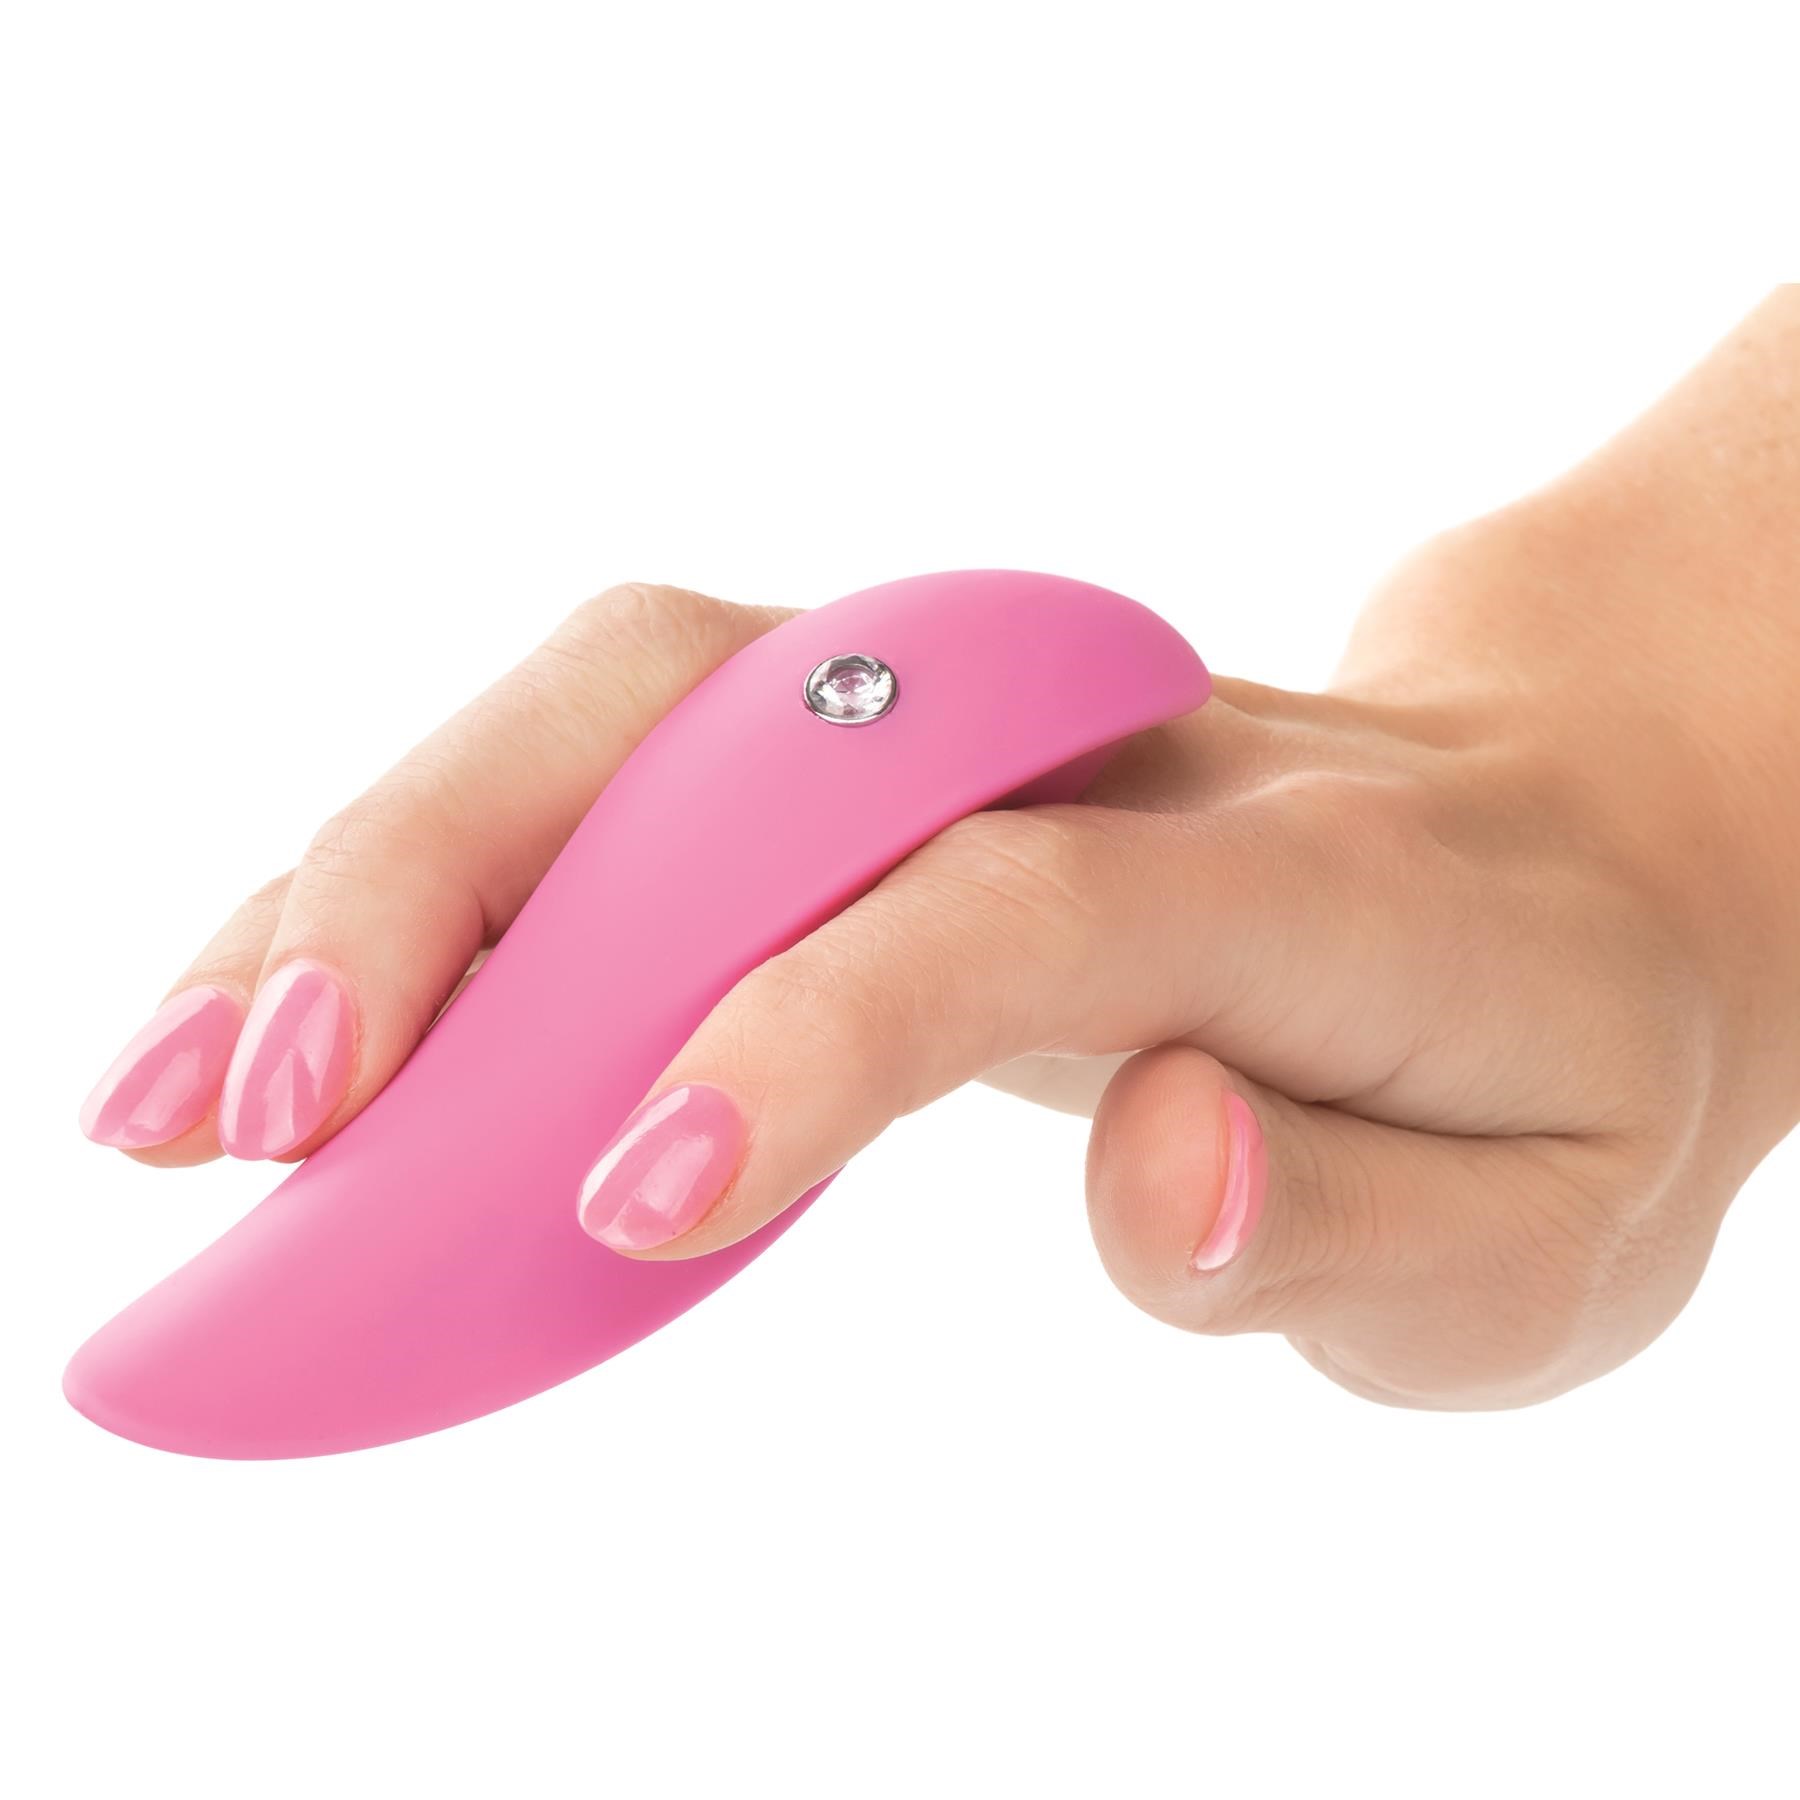 Luvmor Foreplay Finger Vibrator - Hand Shot Showing How to Use